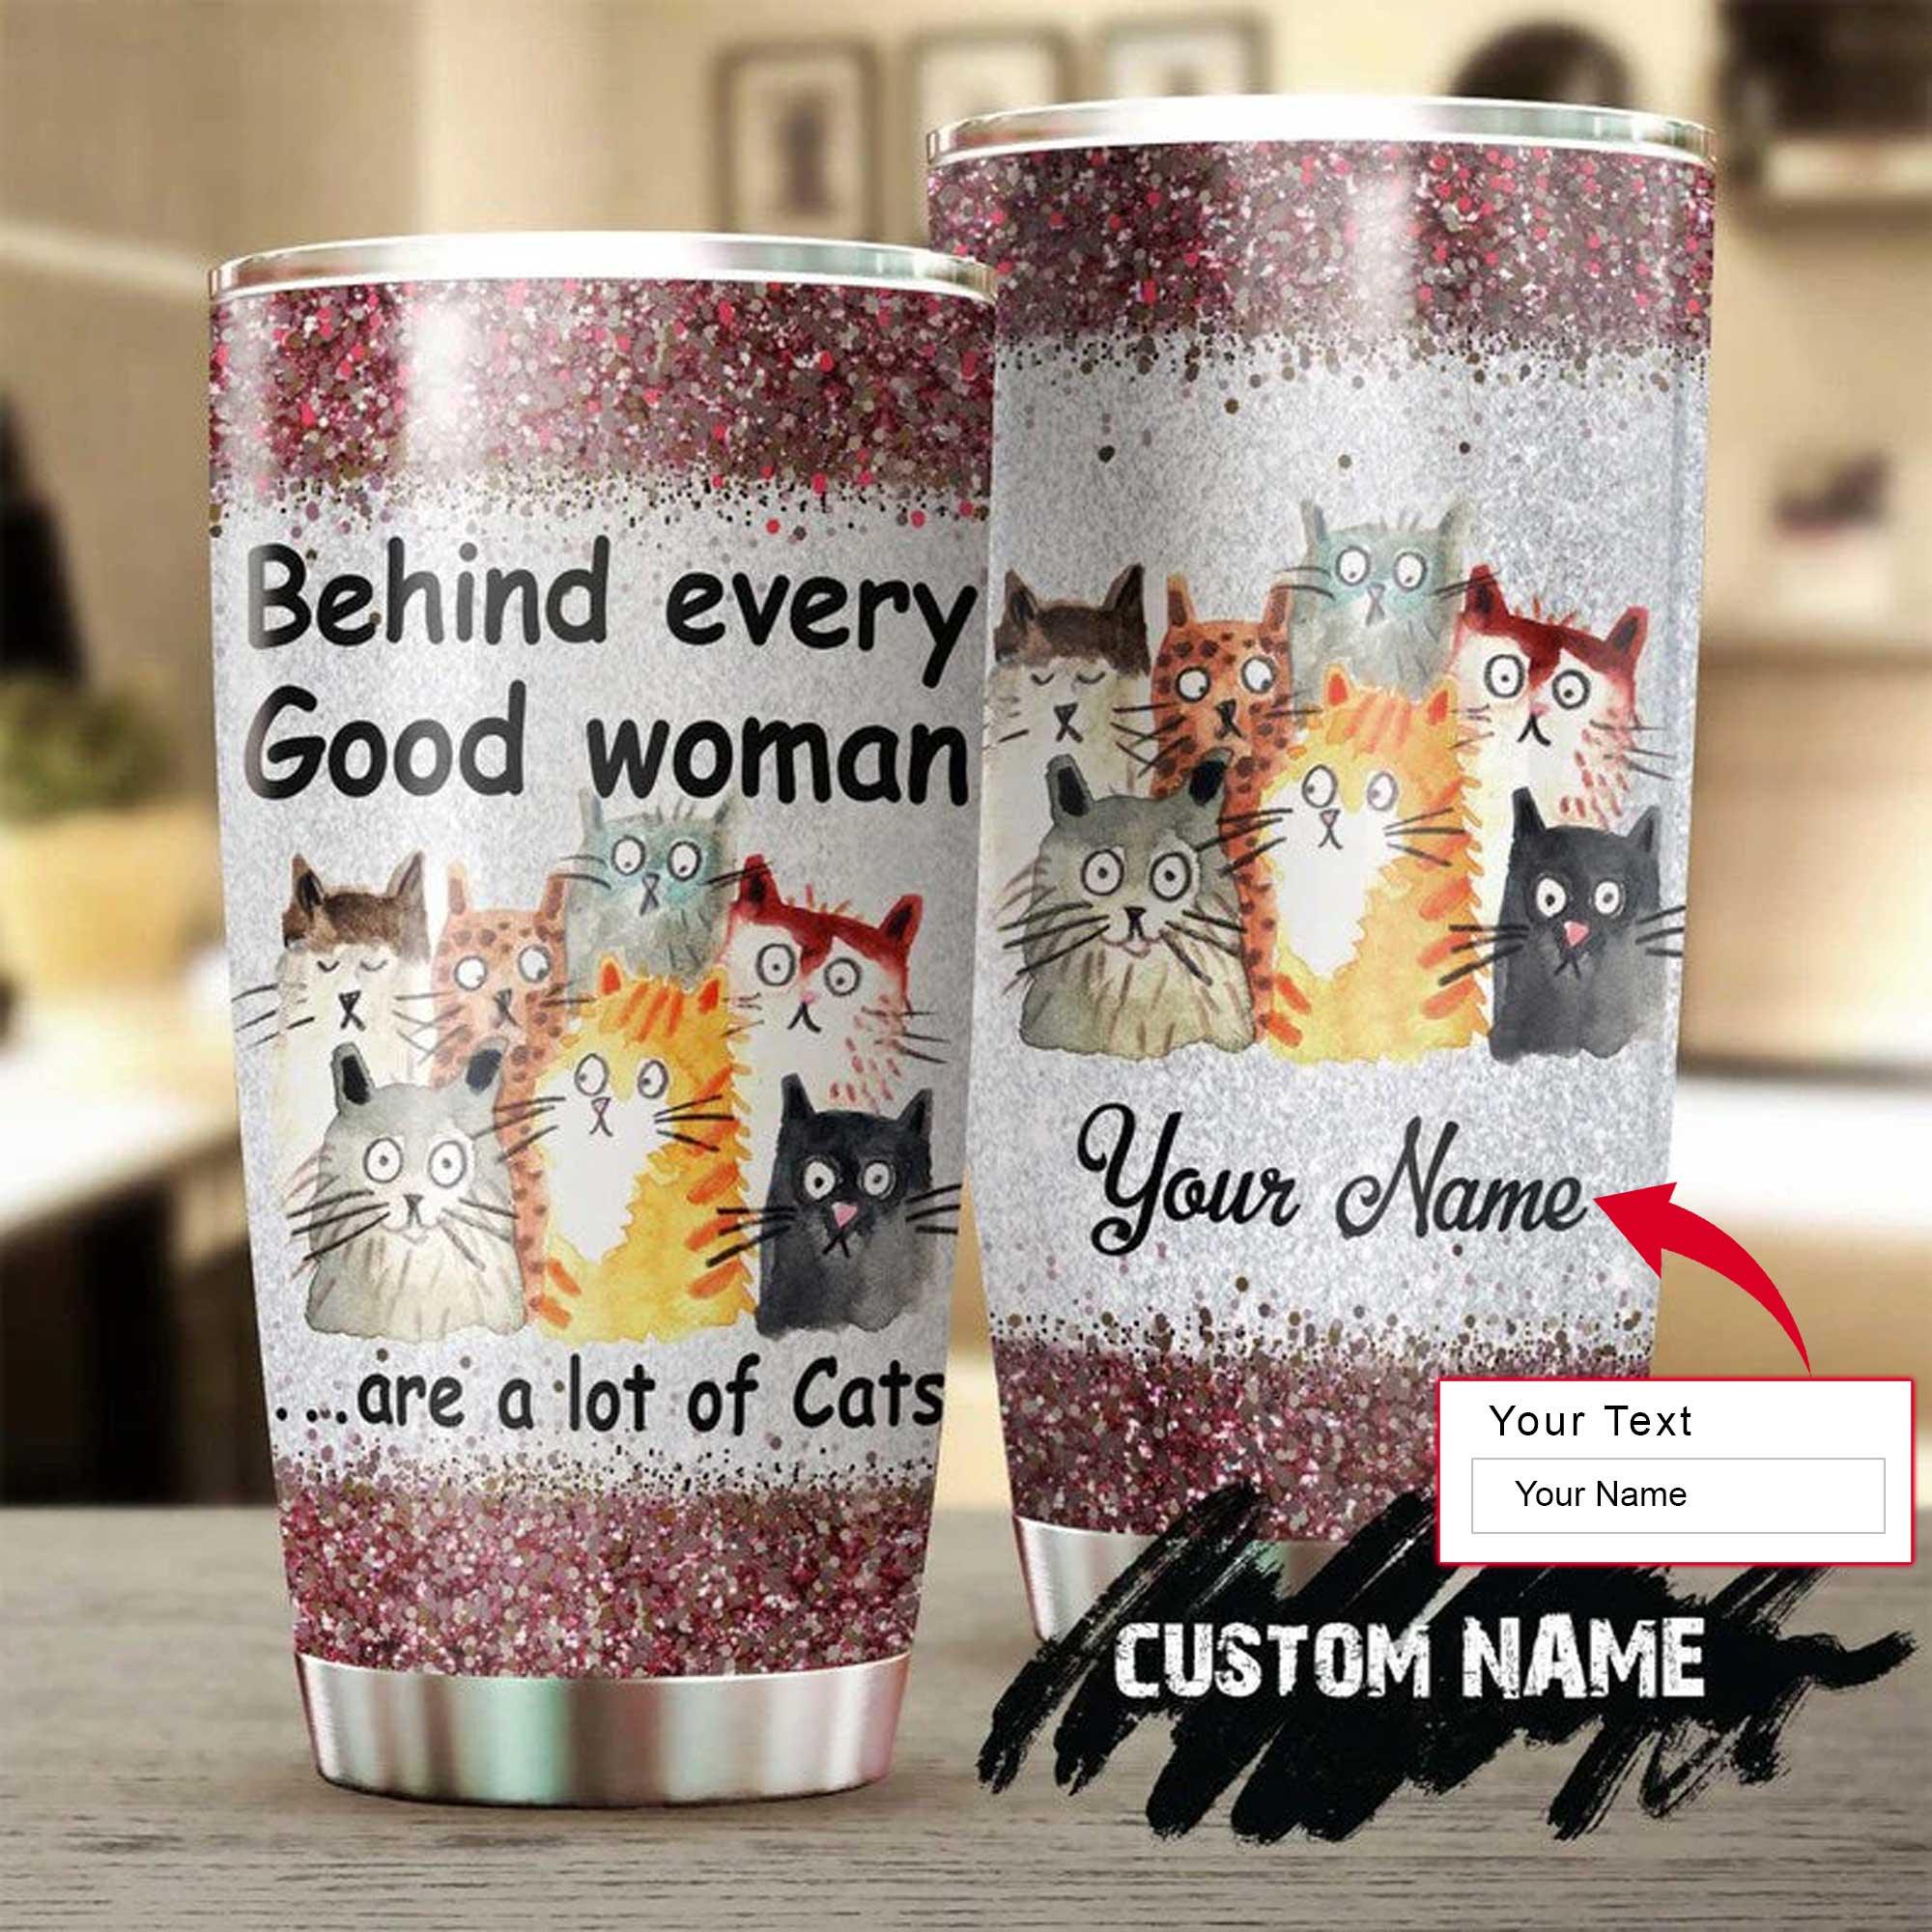 Cat Personalized Tumbler - Behind Every Good Woman Are A Lot Of Cats Personalized Tumbler - Perfect Gift For Cat Lover, Friend, Family - Amzanimalsgift